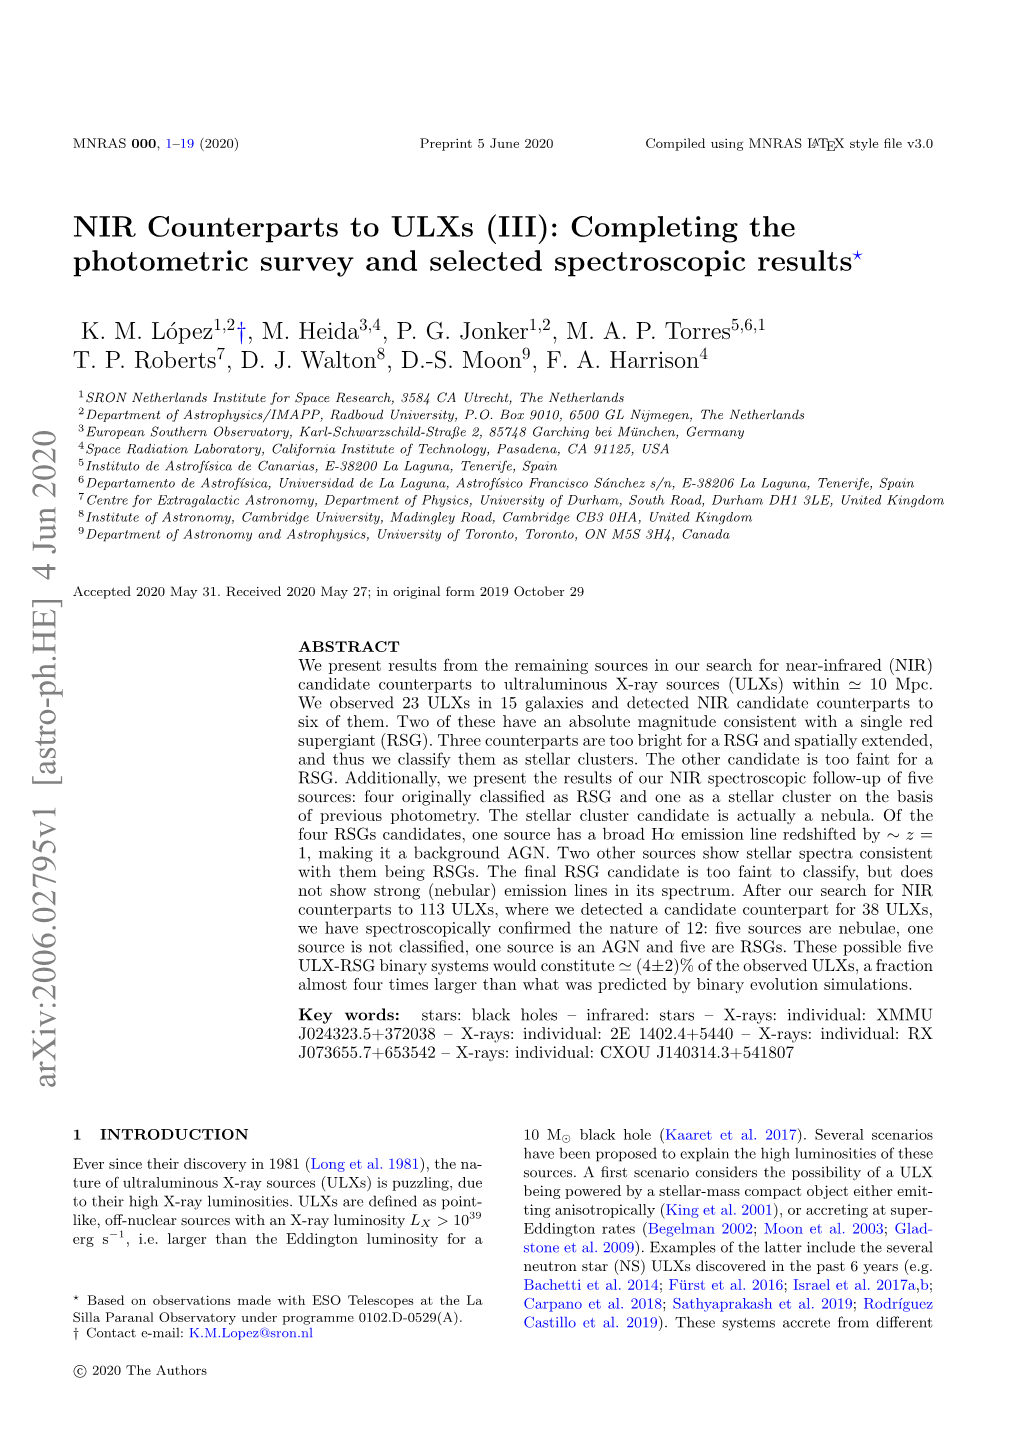 NIR Counterparts to Ulxs (III): Completing the Photometric Survey and Selected Spectroscopic Results?